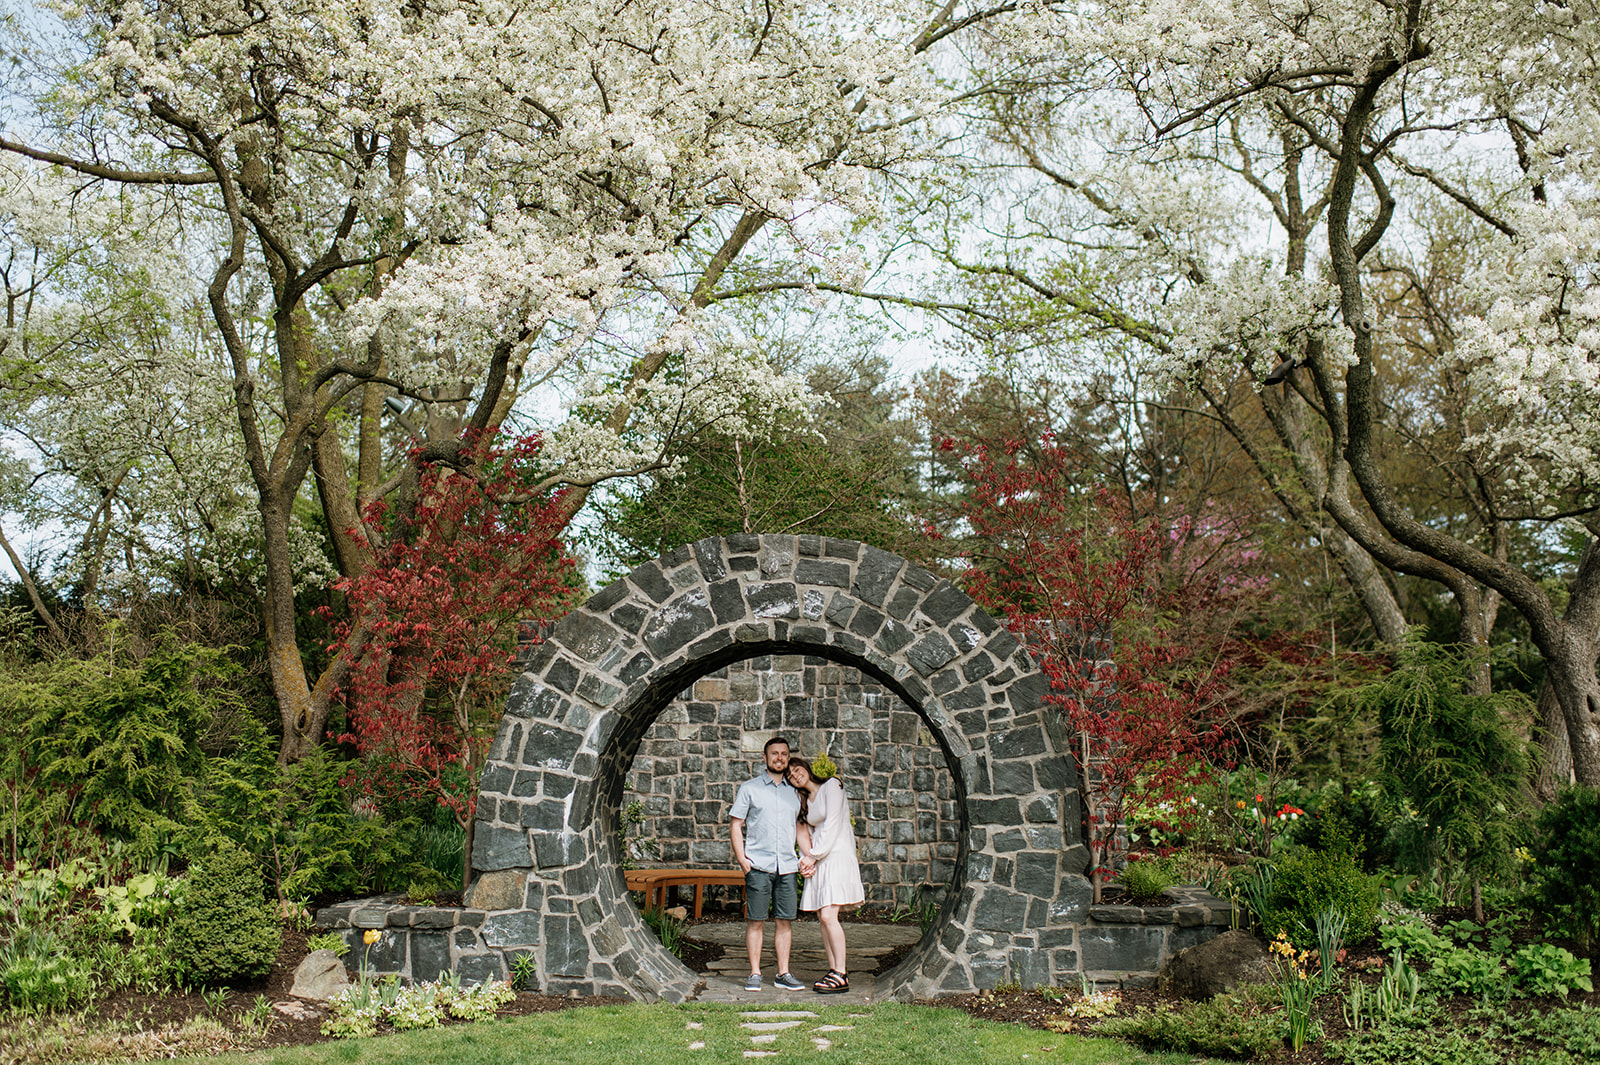 Couples spring Hamstra Gardens engagement photos in Wheatfield, Indiana